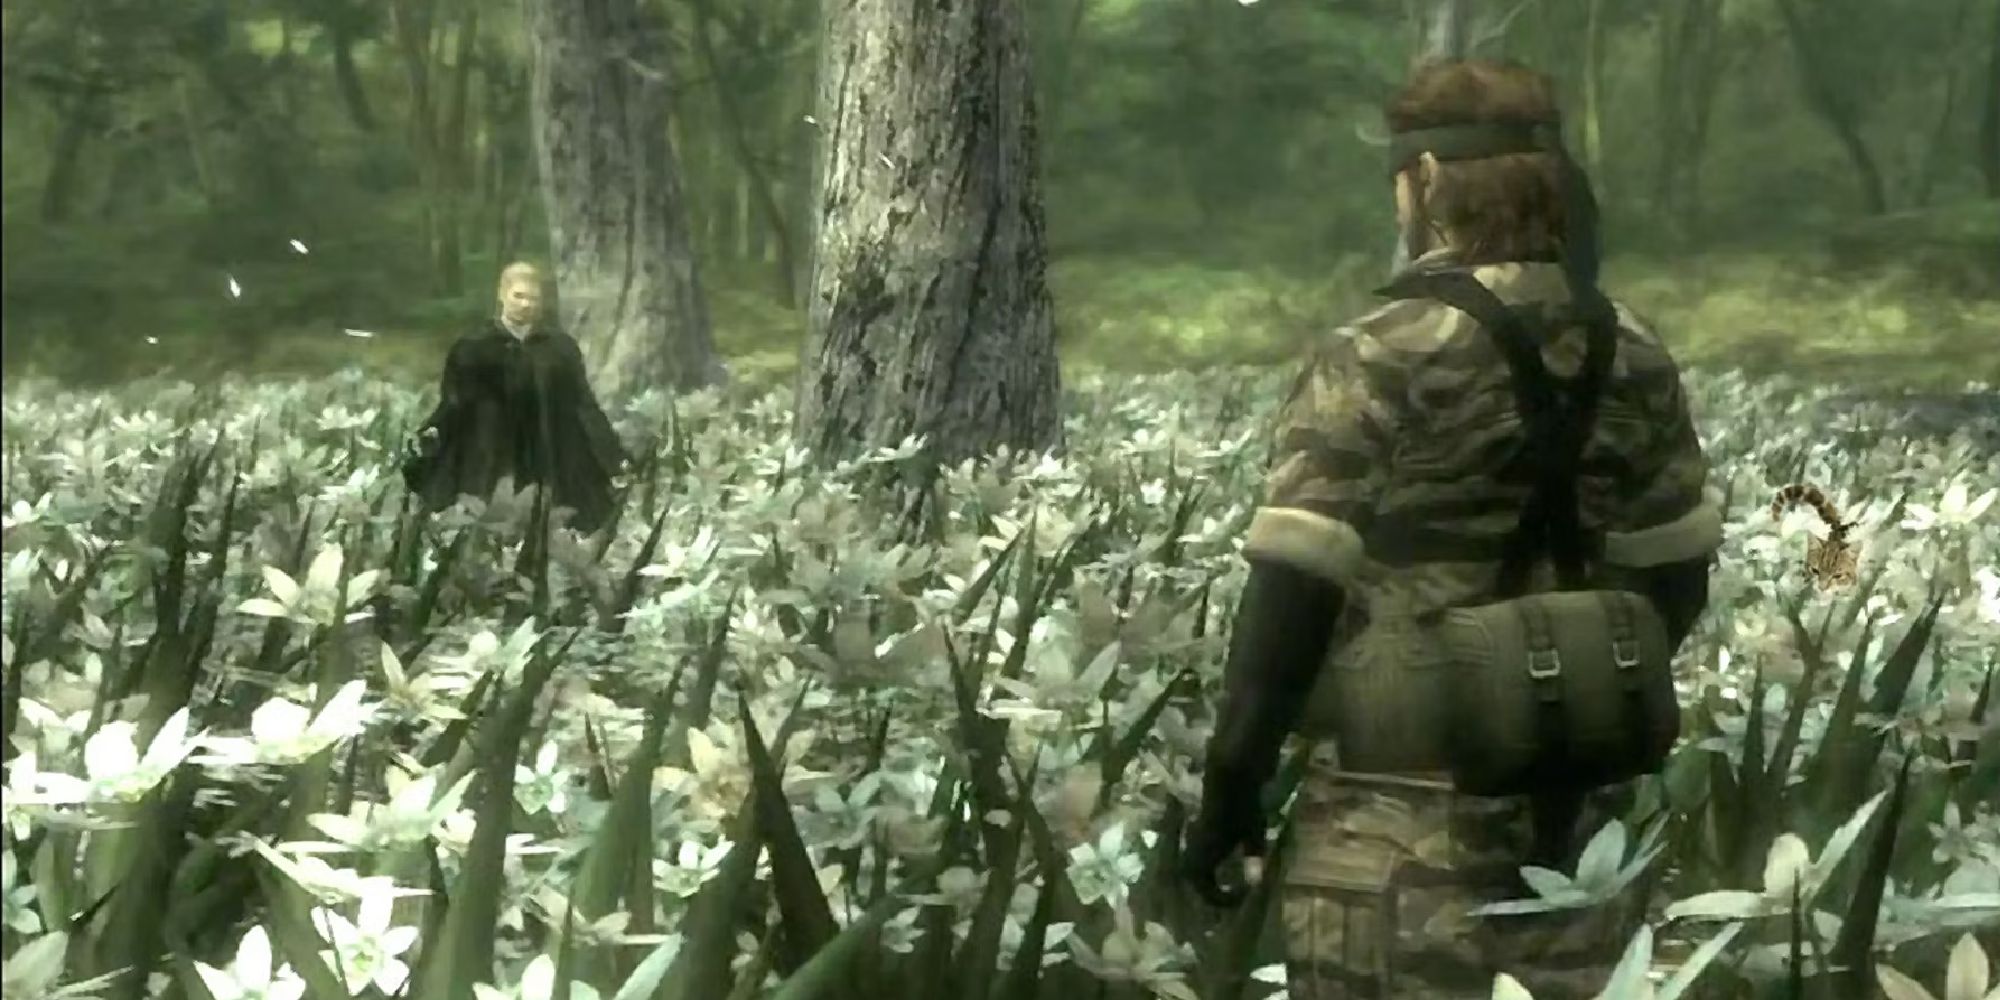 Snake and Boss facing each other in a field of white flowers.